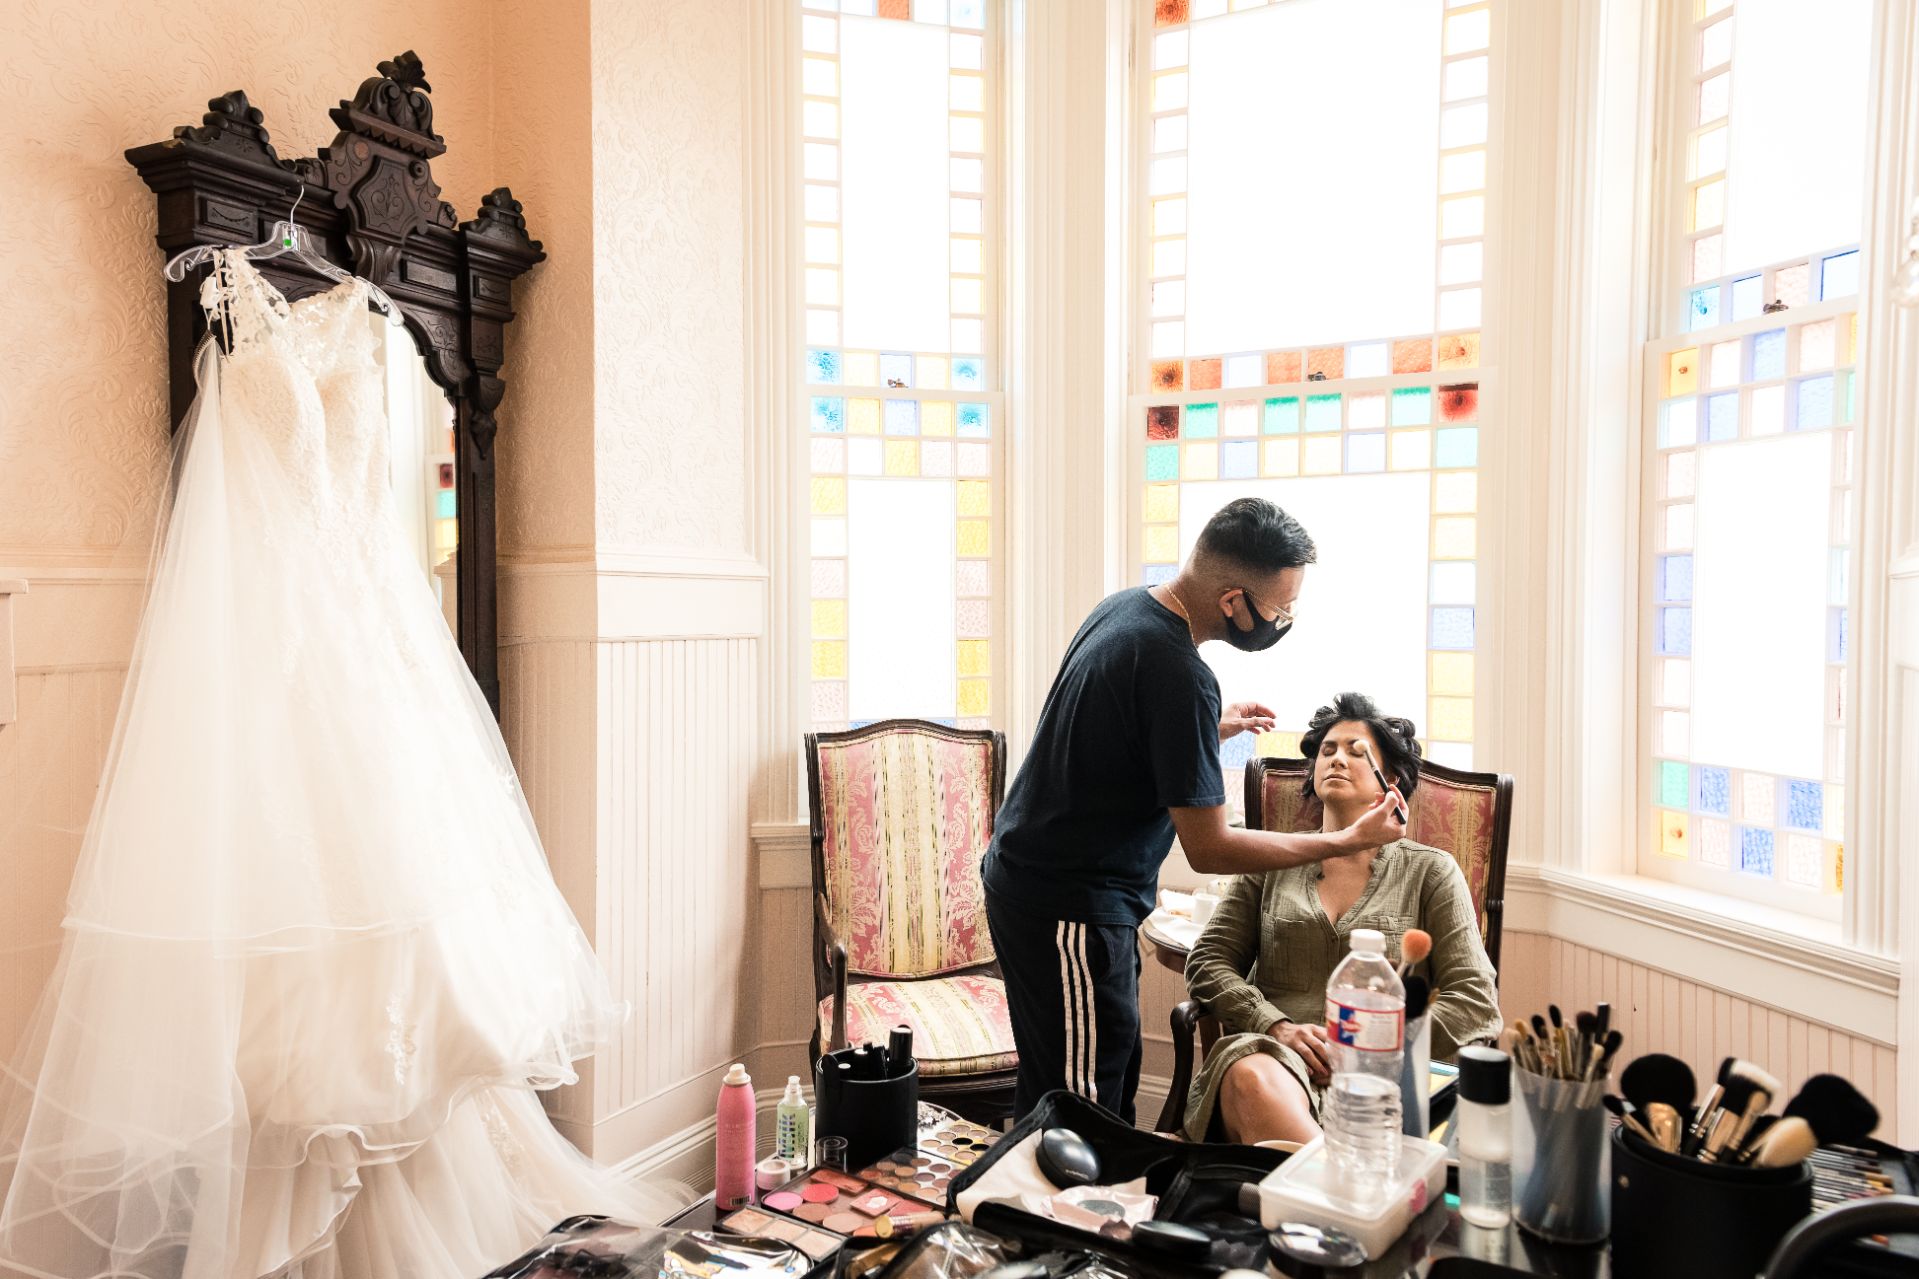 Bride is sitting in chair while makeup artist puts makeup on the bride. The brides dress is hanging in the background with stained-glass windows all behind.